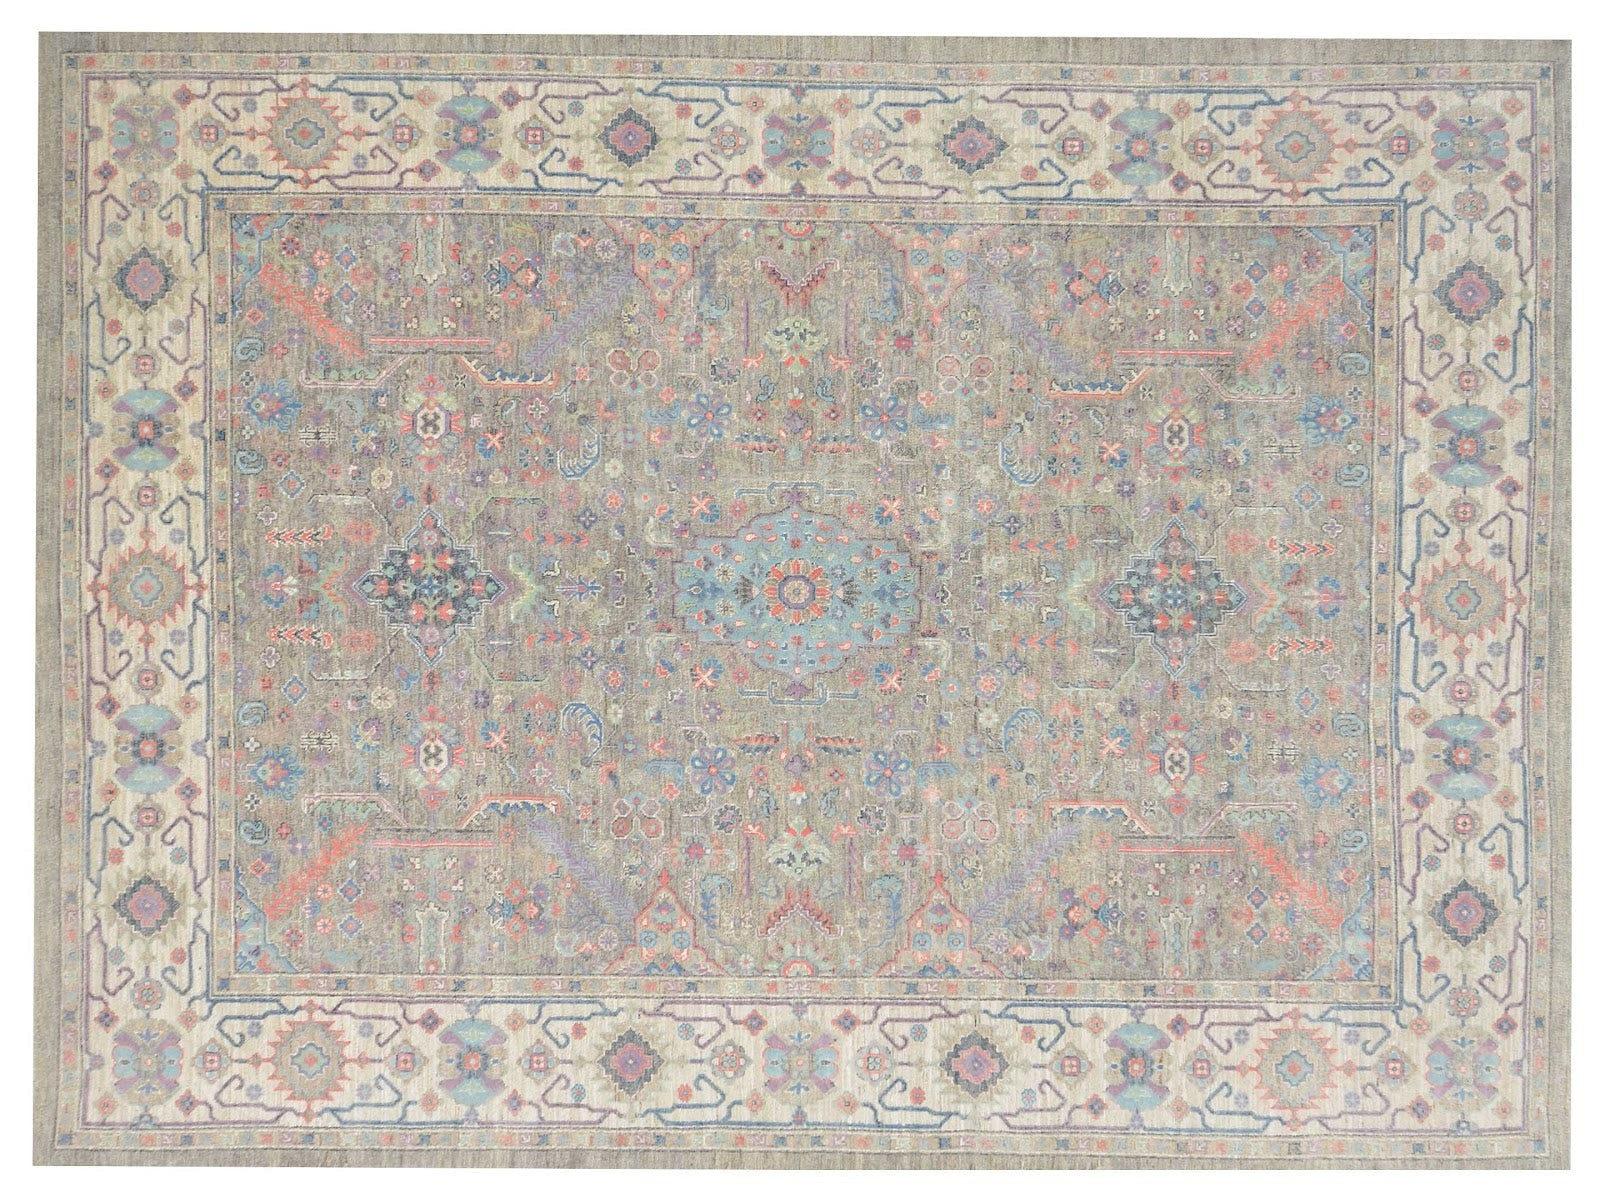 9x12 hand-knotted Ziegler wool rug showcasing traditional motifs in a palette of neutrals, blues, and pinks.